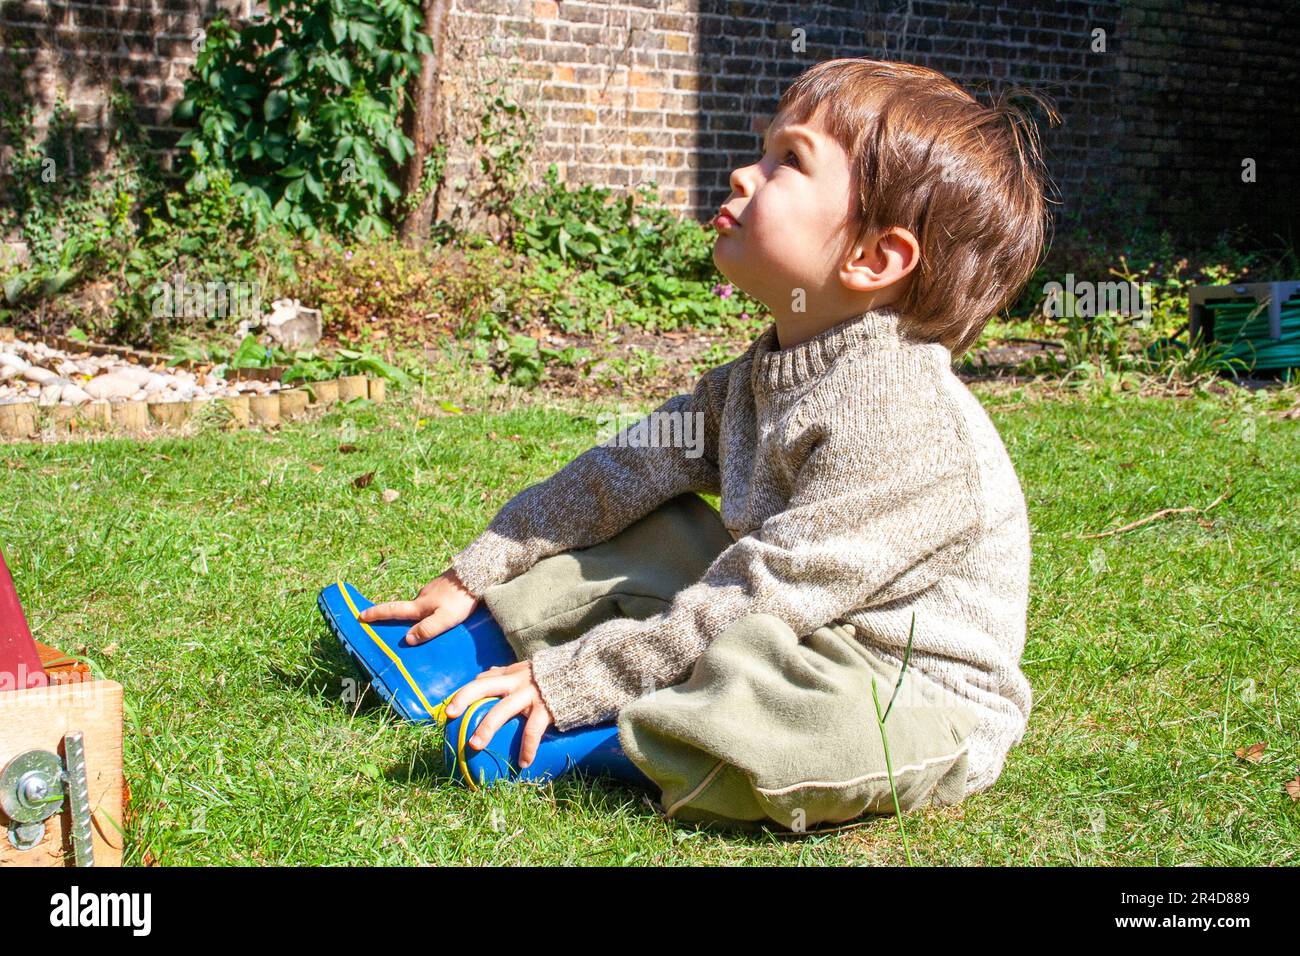 Young boy, child, 2 year old, sitting on grass in garden with hands on his boots, looking up at the sky in total contemplation. Bright sunshine. Stock Photo